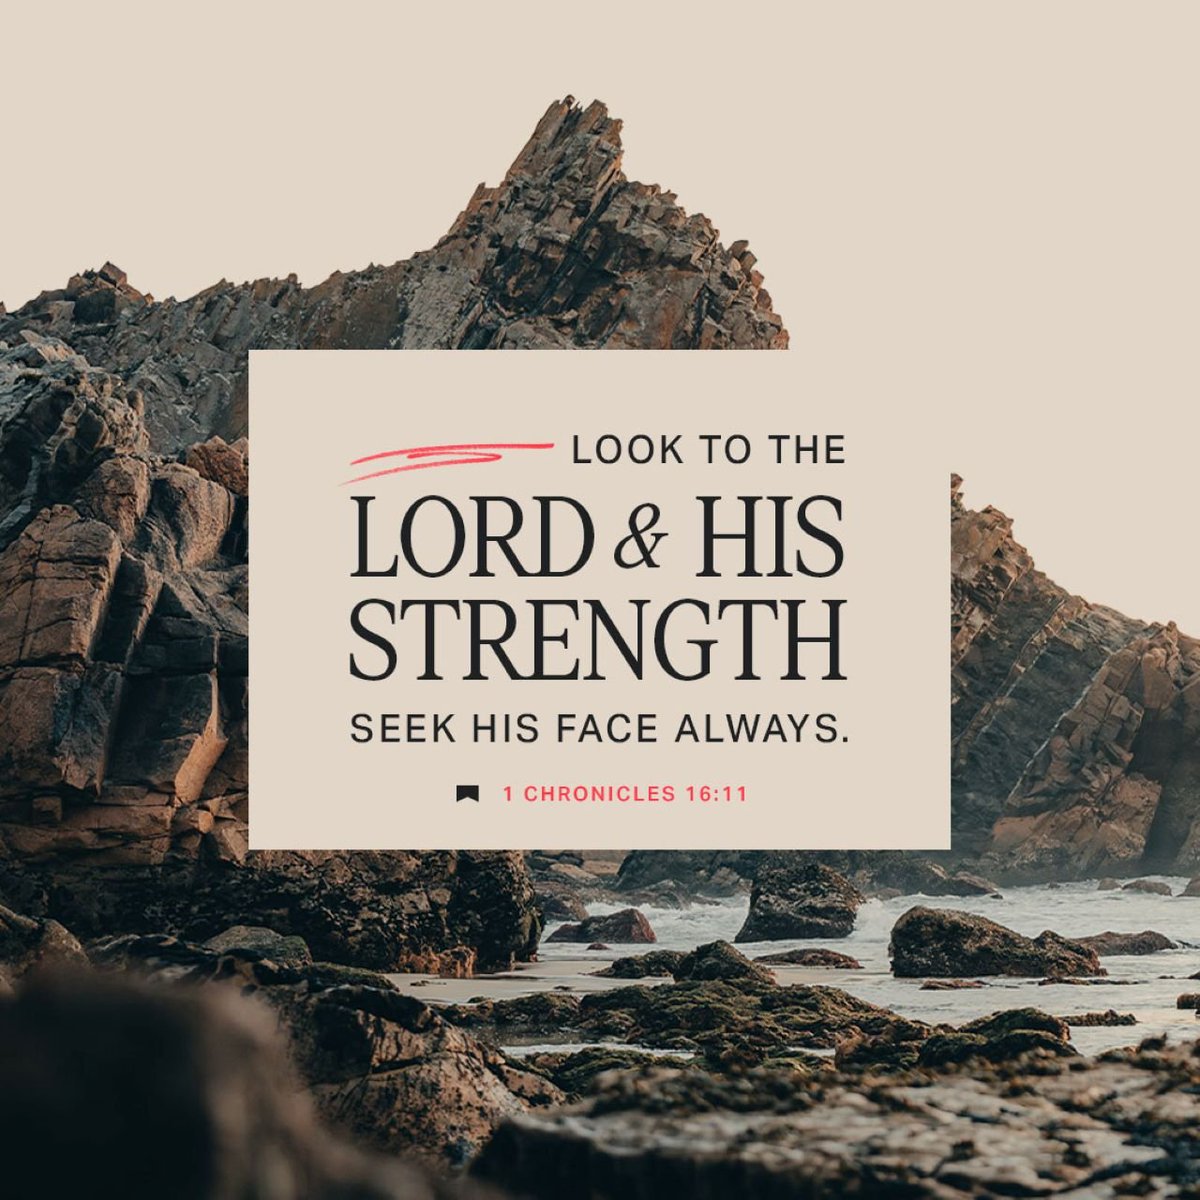 #christian #bible #faith #love #christianity #church #bibleverse #gospel #worship #blessed #hope #truth #scripture #biblestudy #inspiration #influencer  #motivation #instagood #biblestudy #trending #1chronicles16v11 #seekthelord #strength #seek #presence #continually